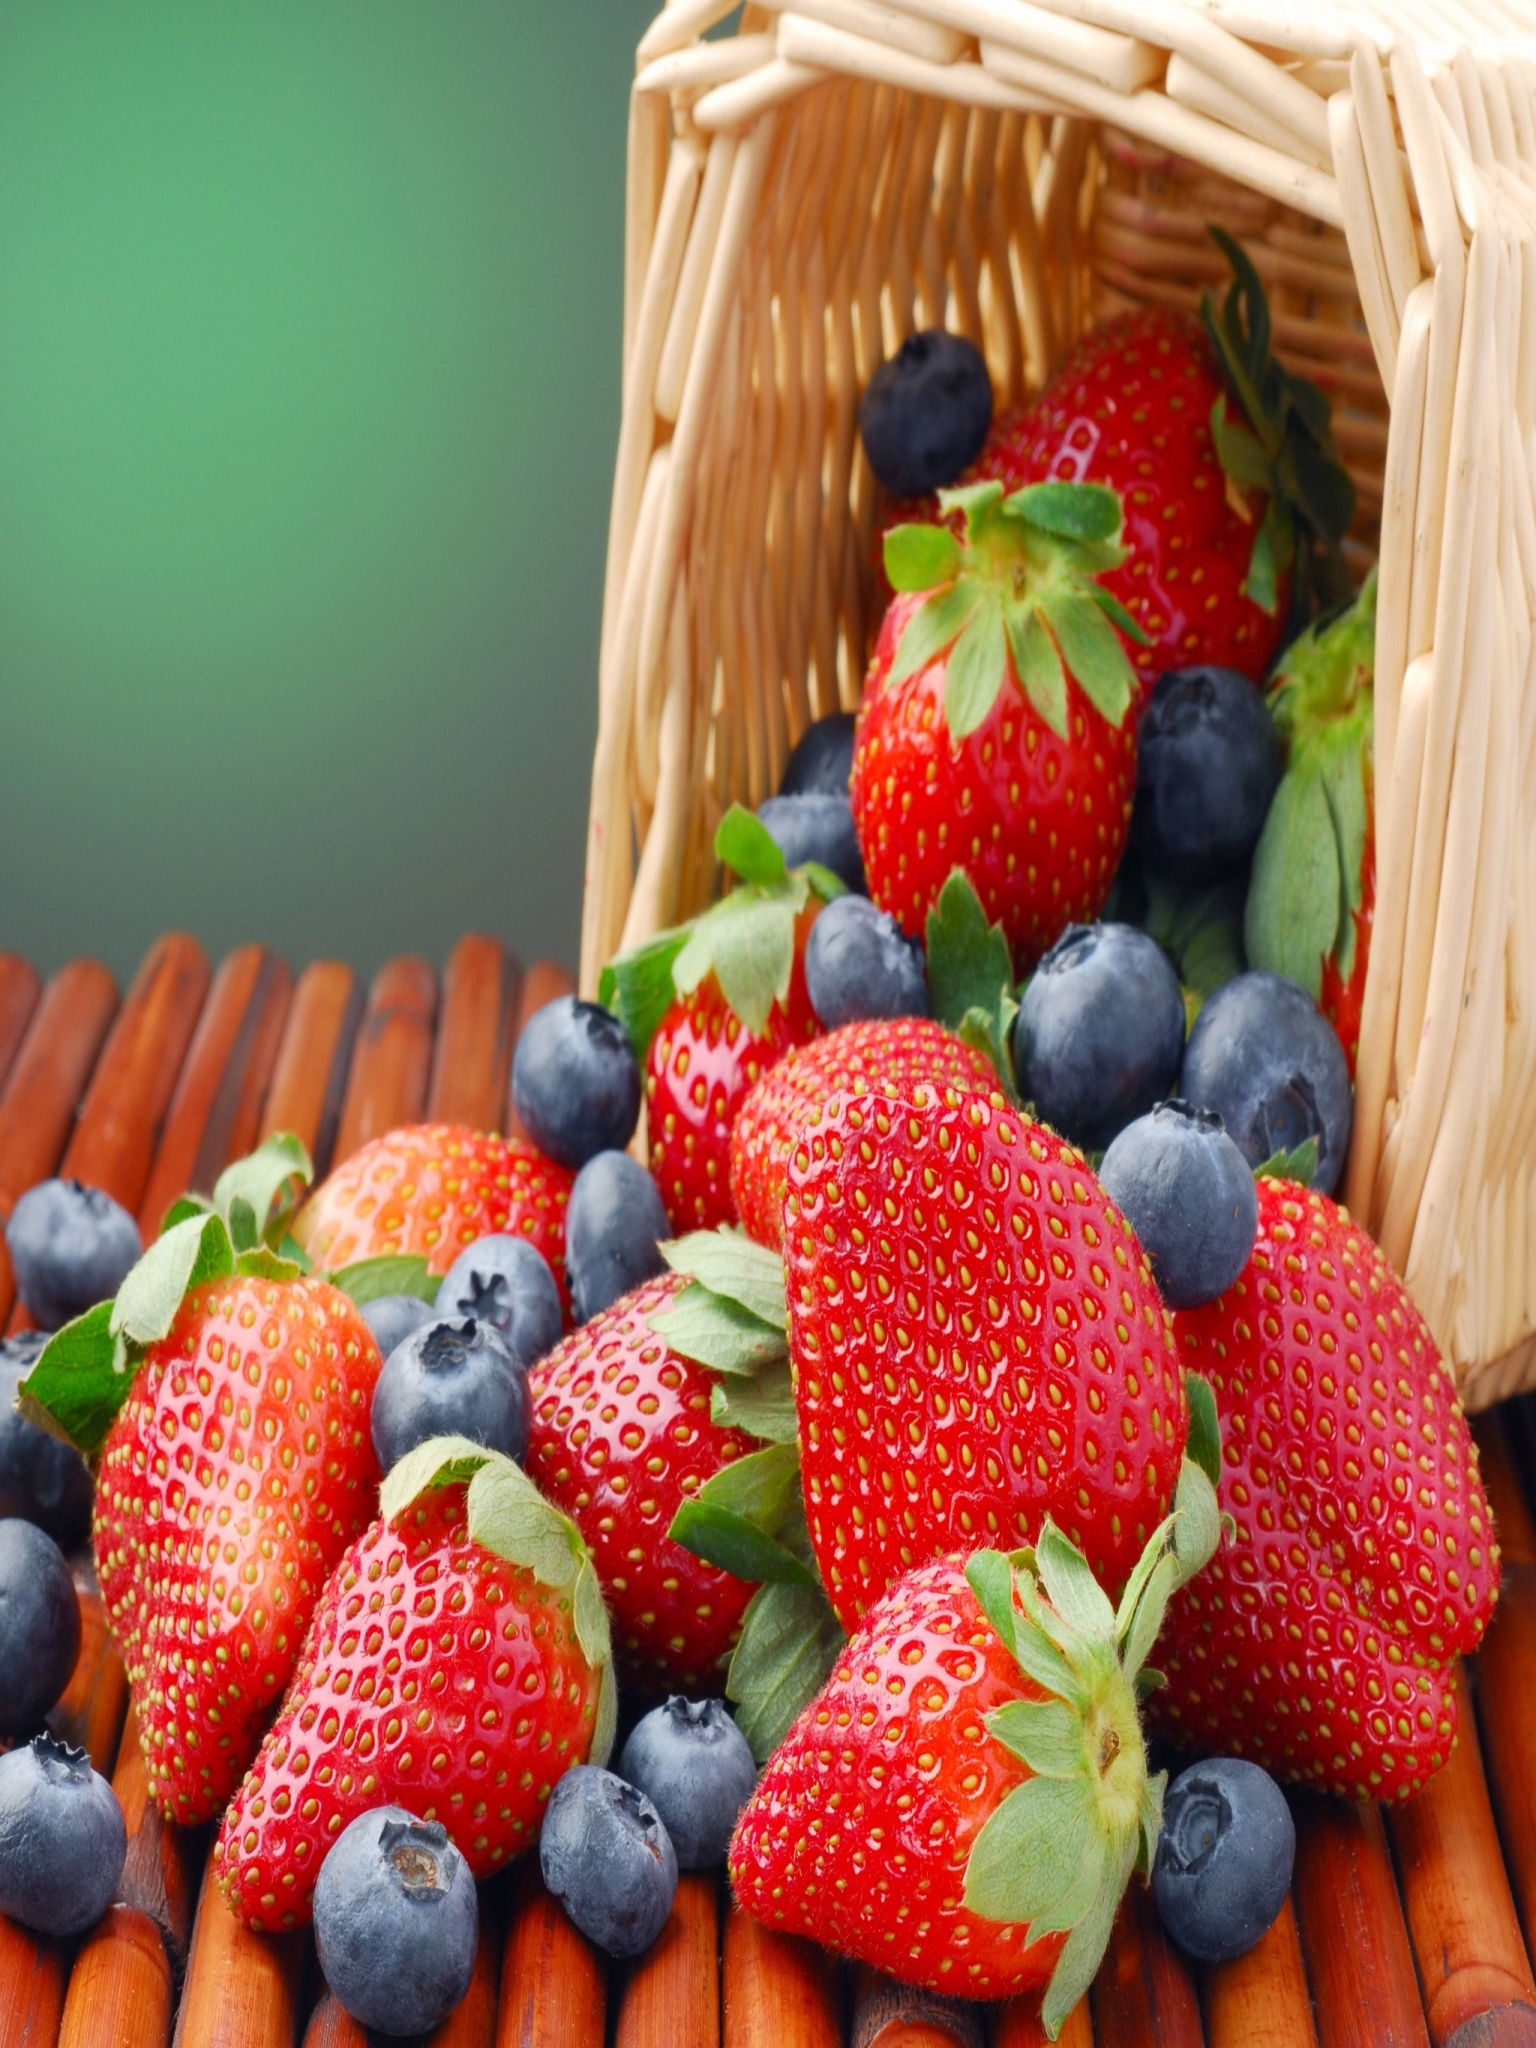 Strawberries in the basket for Apple iPad Air 2 resolution